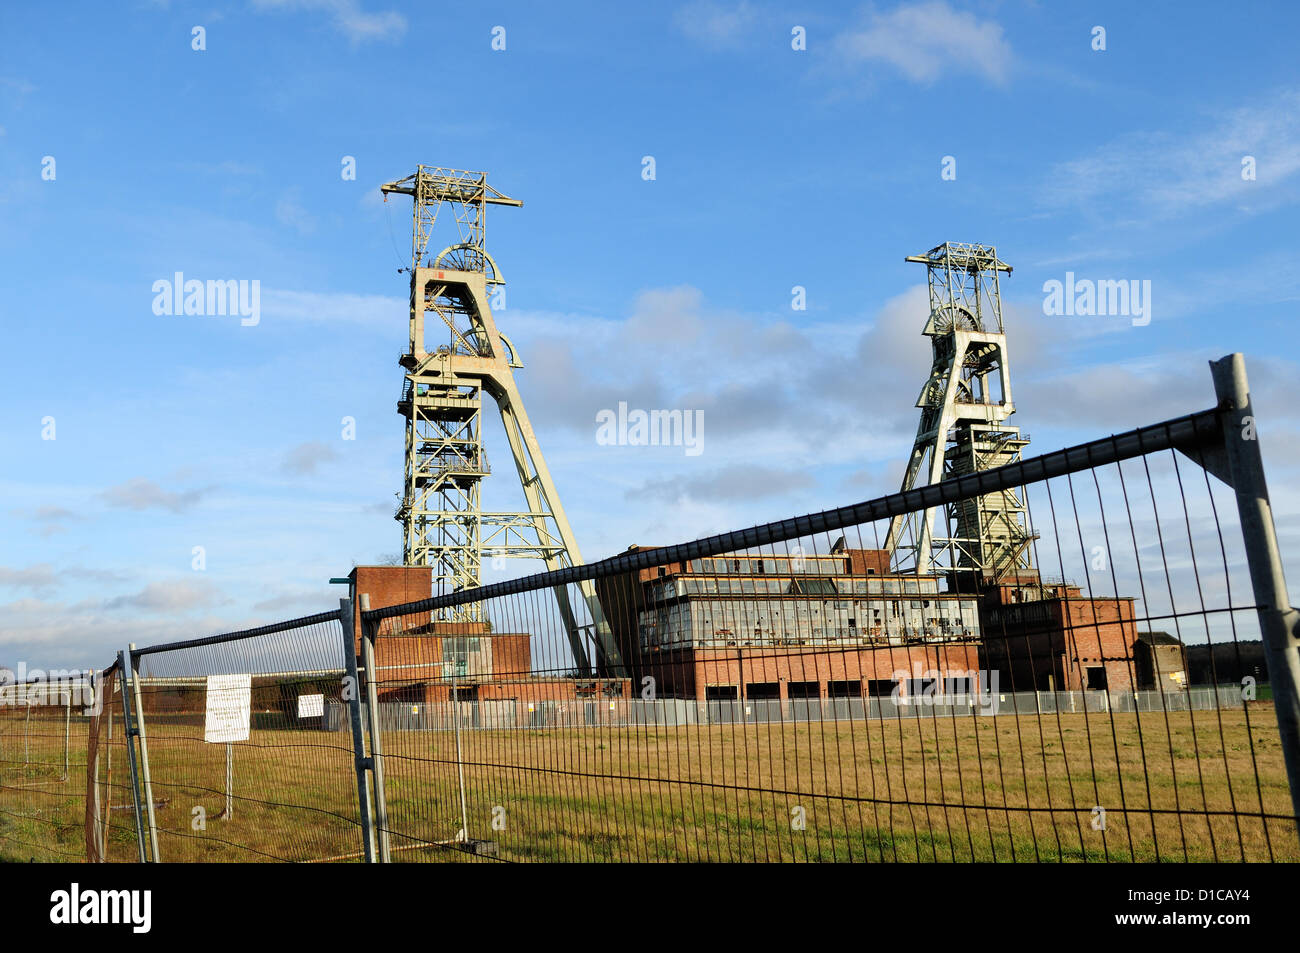 ClipstoneColliery, Notts, UK. 15th December 2012. The colliery which closed in 2003 is wanted for redevelopment ,The 200ft (61m) grade11 listed headstocks are the only part of the old pit that remain (the tallest of thier kind in Europe).MP Mark Spencer (Newark and Sherwood)has joined the growing number of groups who would like them to be demolished. Stock Photo